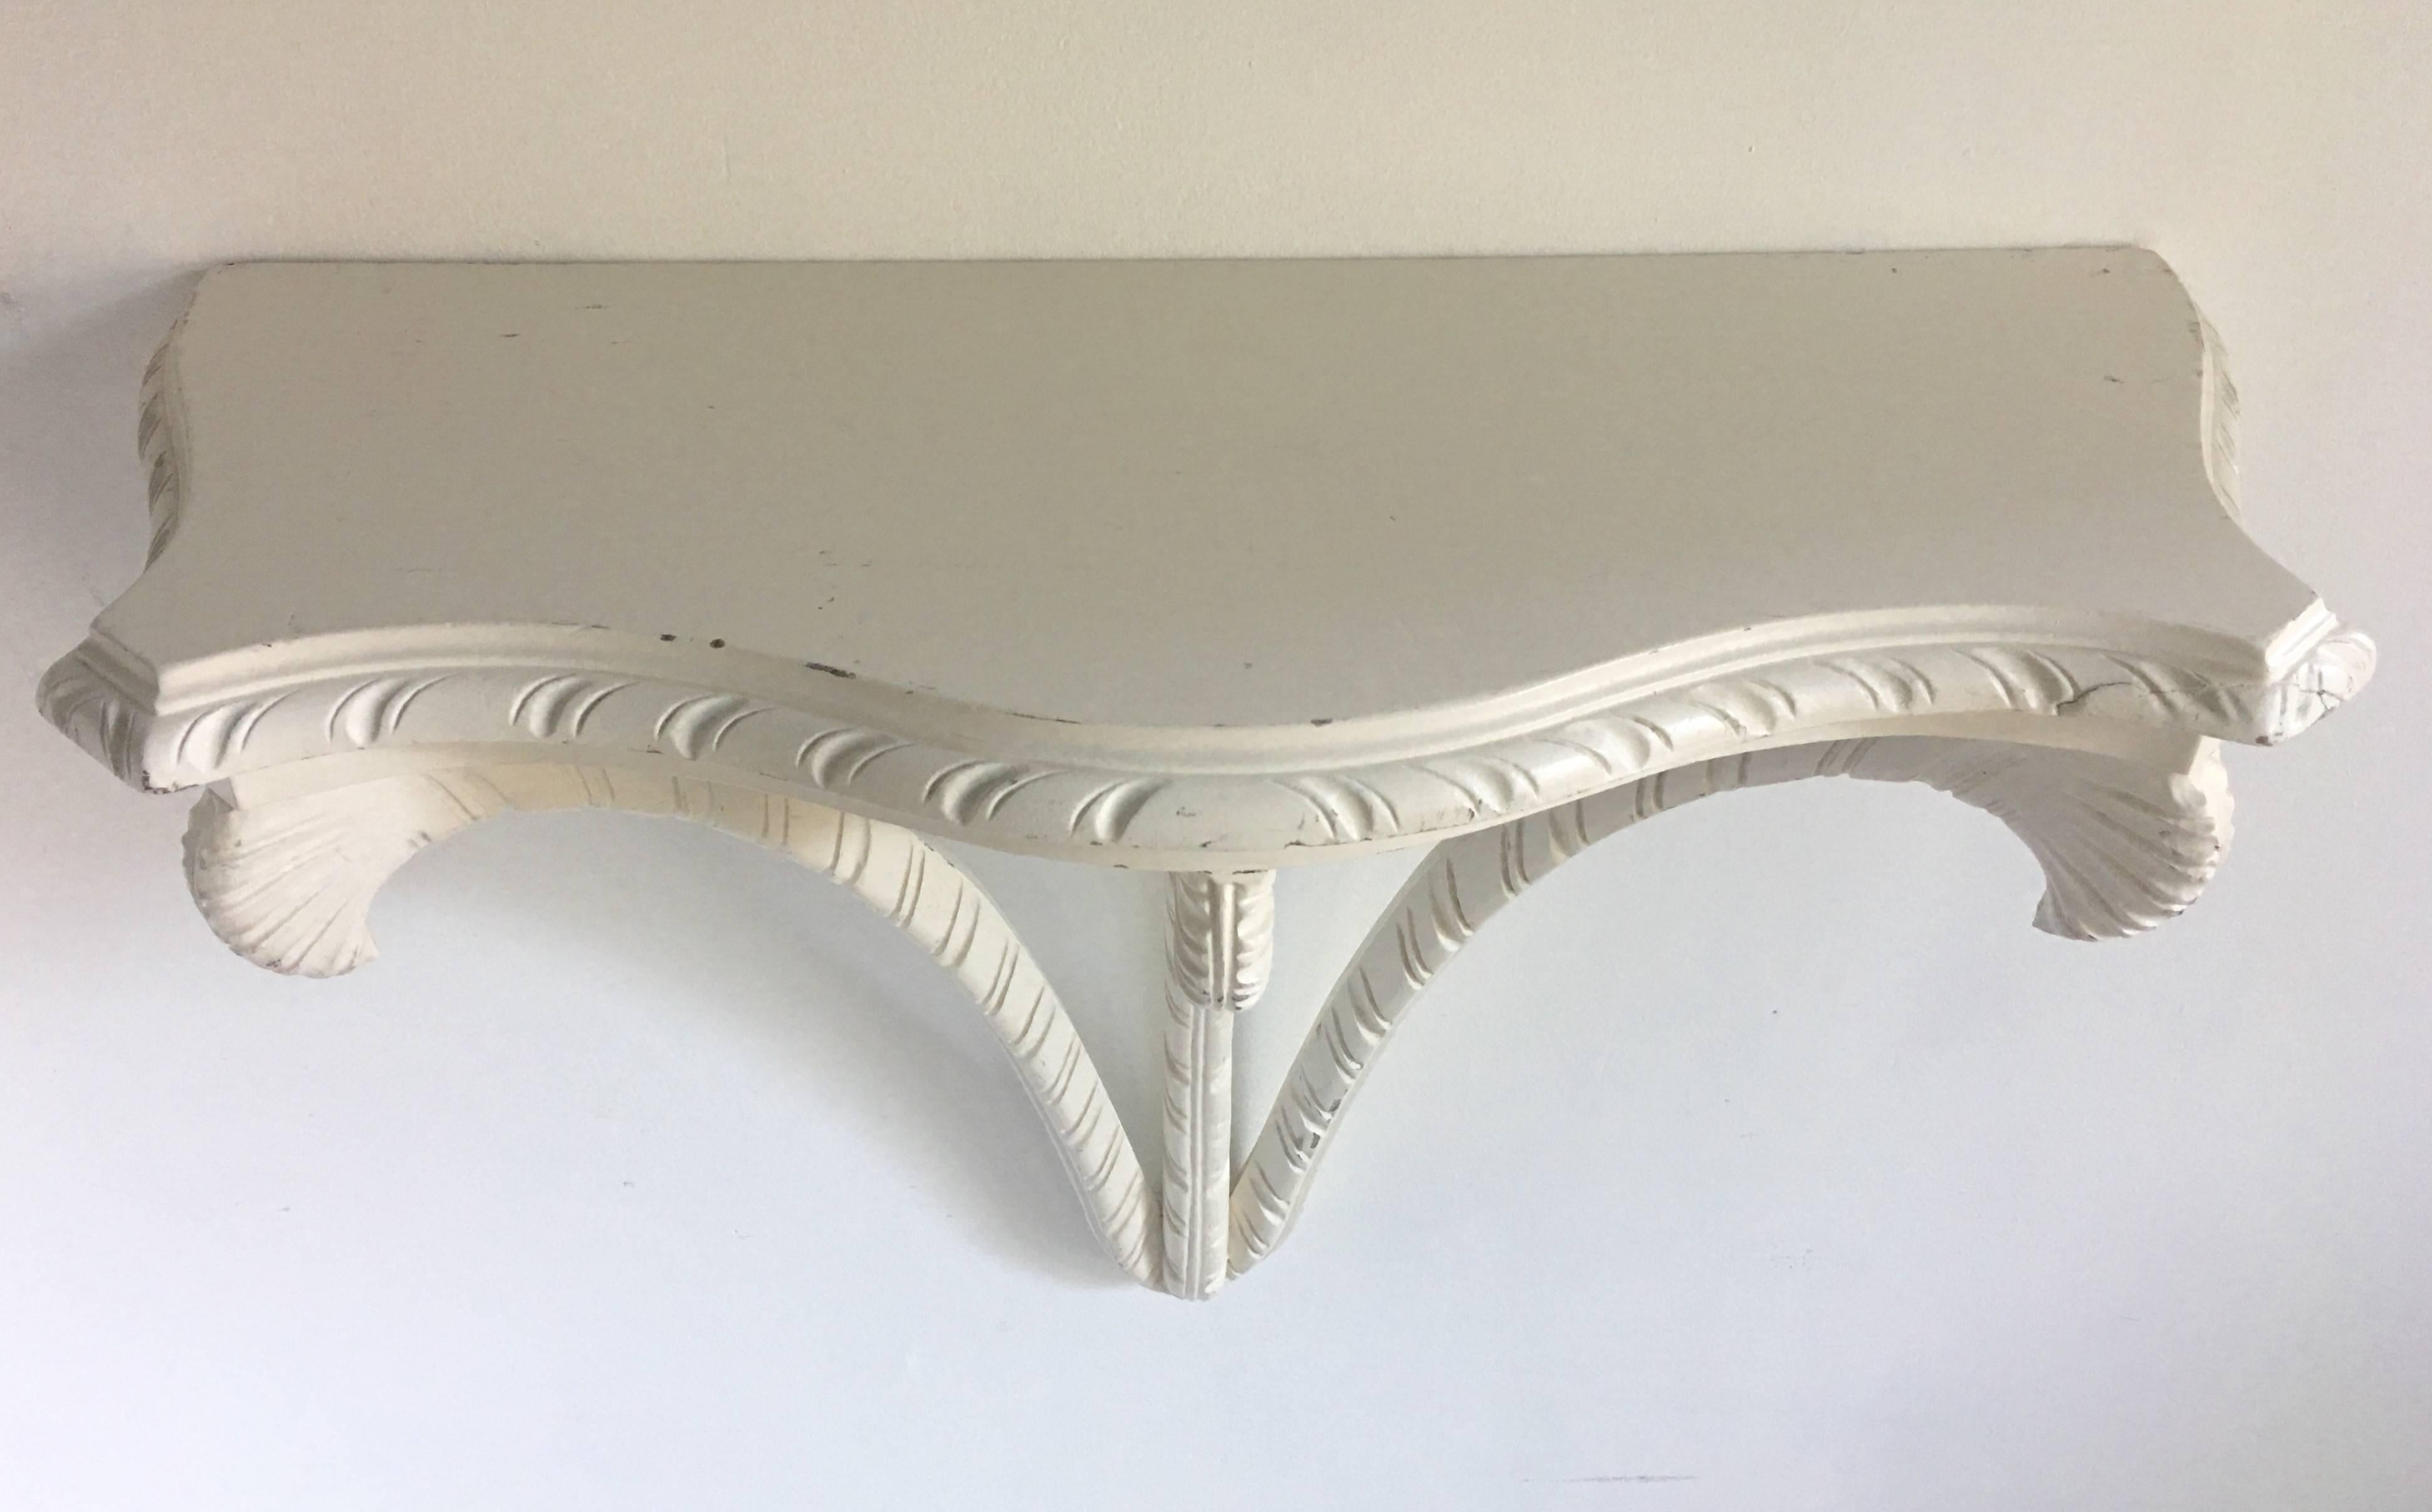 Large Mid-Century Hollywood Regency style wall-mounted console shelf or bracket. Sculptural carved mahogany wood features acanthus leaf or plum design and painted white/cream finish. Nice size for a small entry or hallway and could also be used as